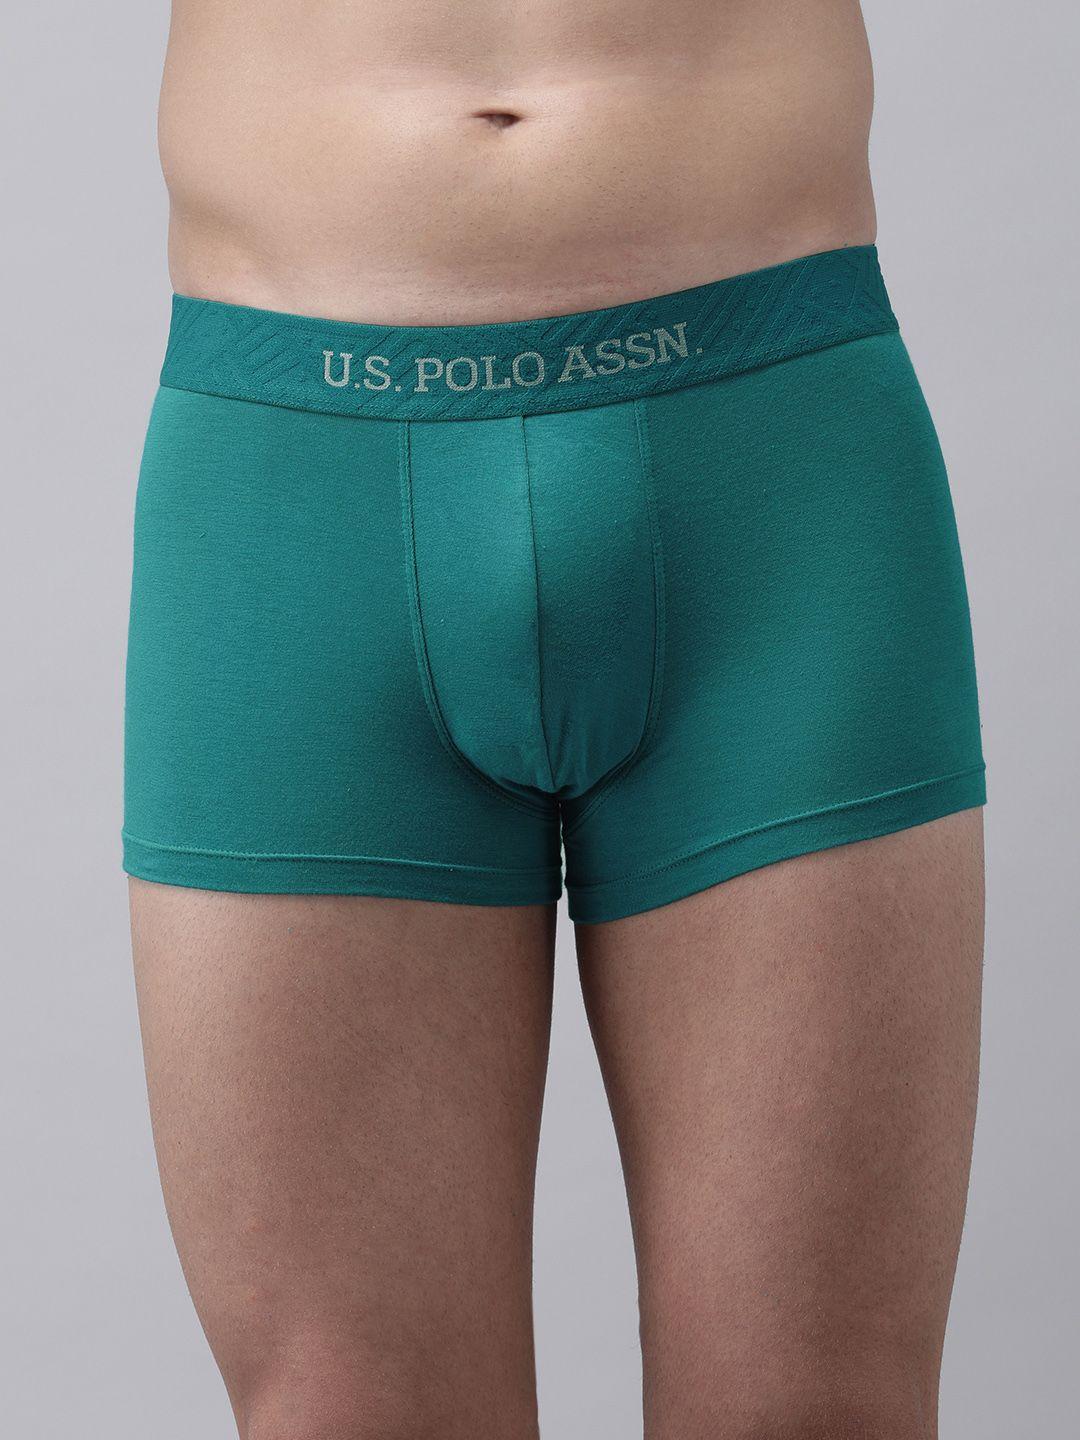 u.s. polo assn. men solid turquoise blue modal trunk i703-b05-pl